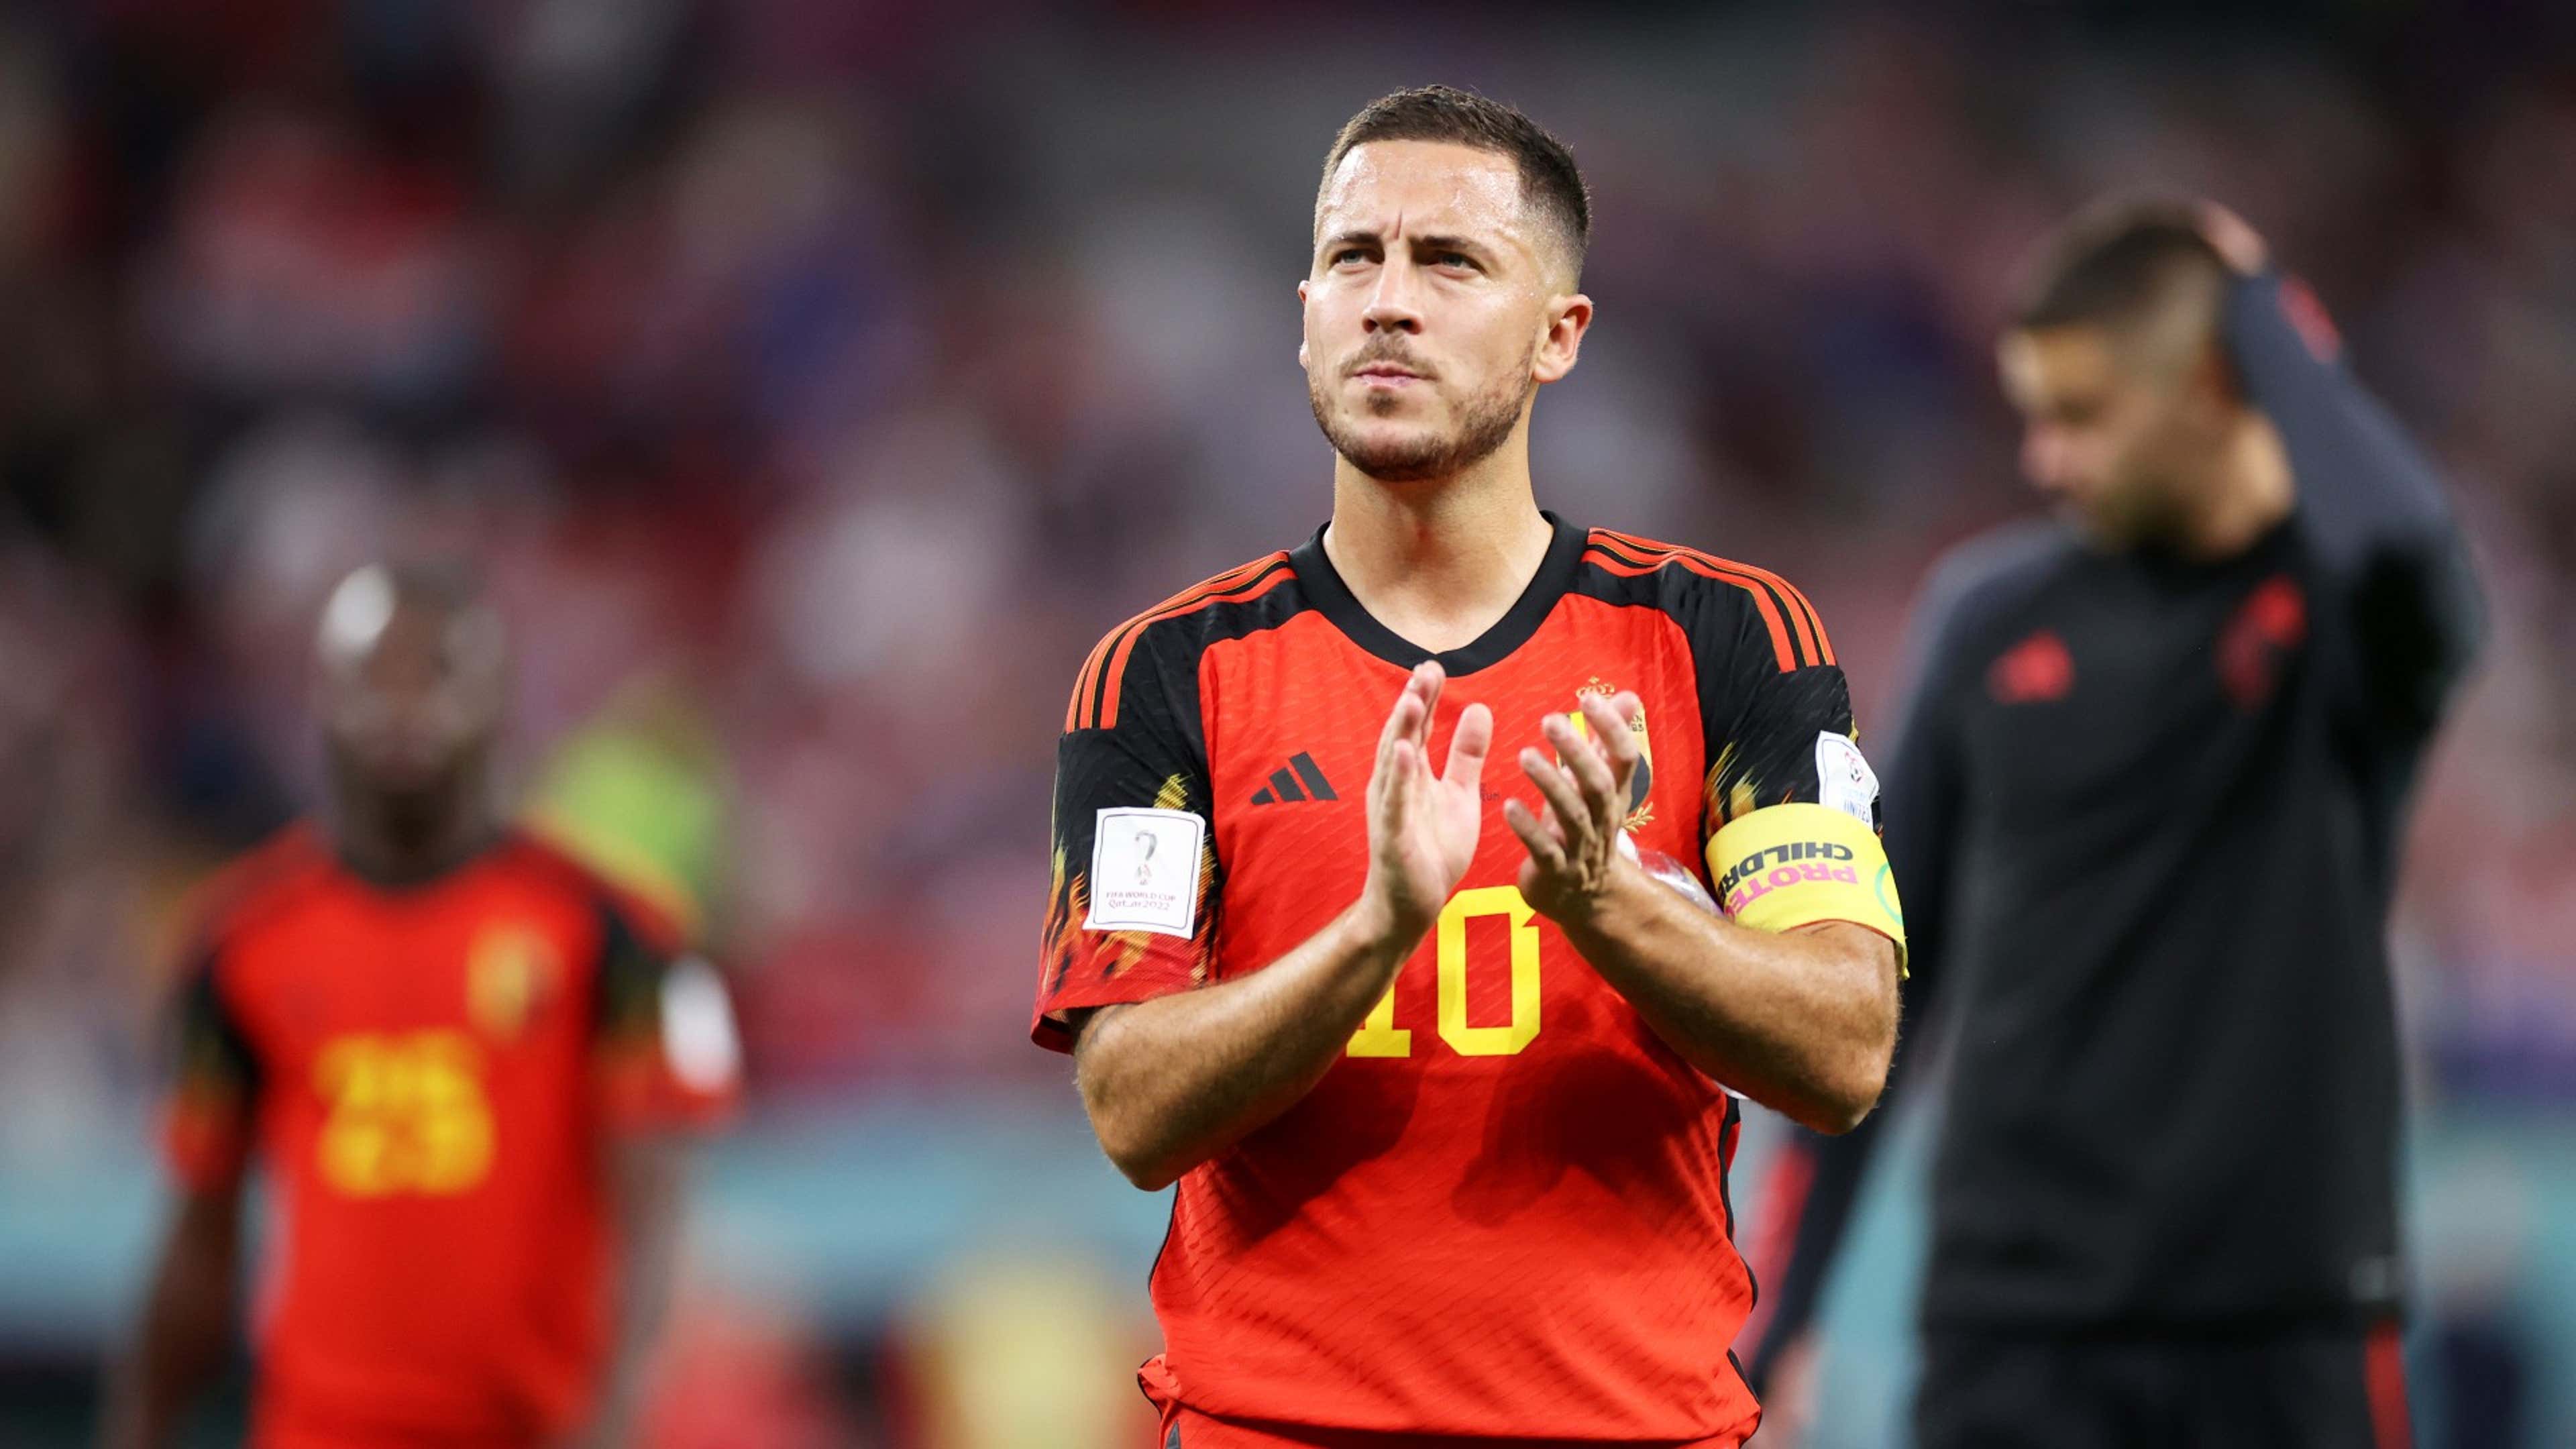 Belgium captain Hazard RETIRES from international football after disastrous World Cup campaign | Goal.com US